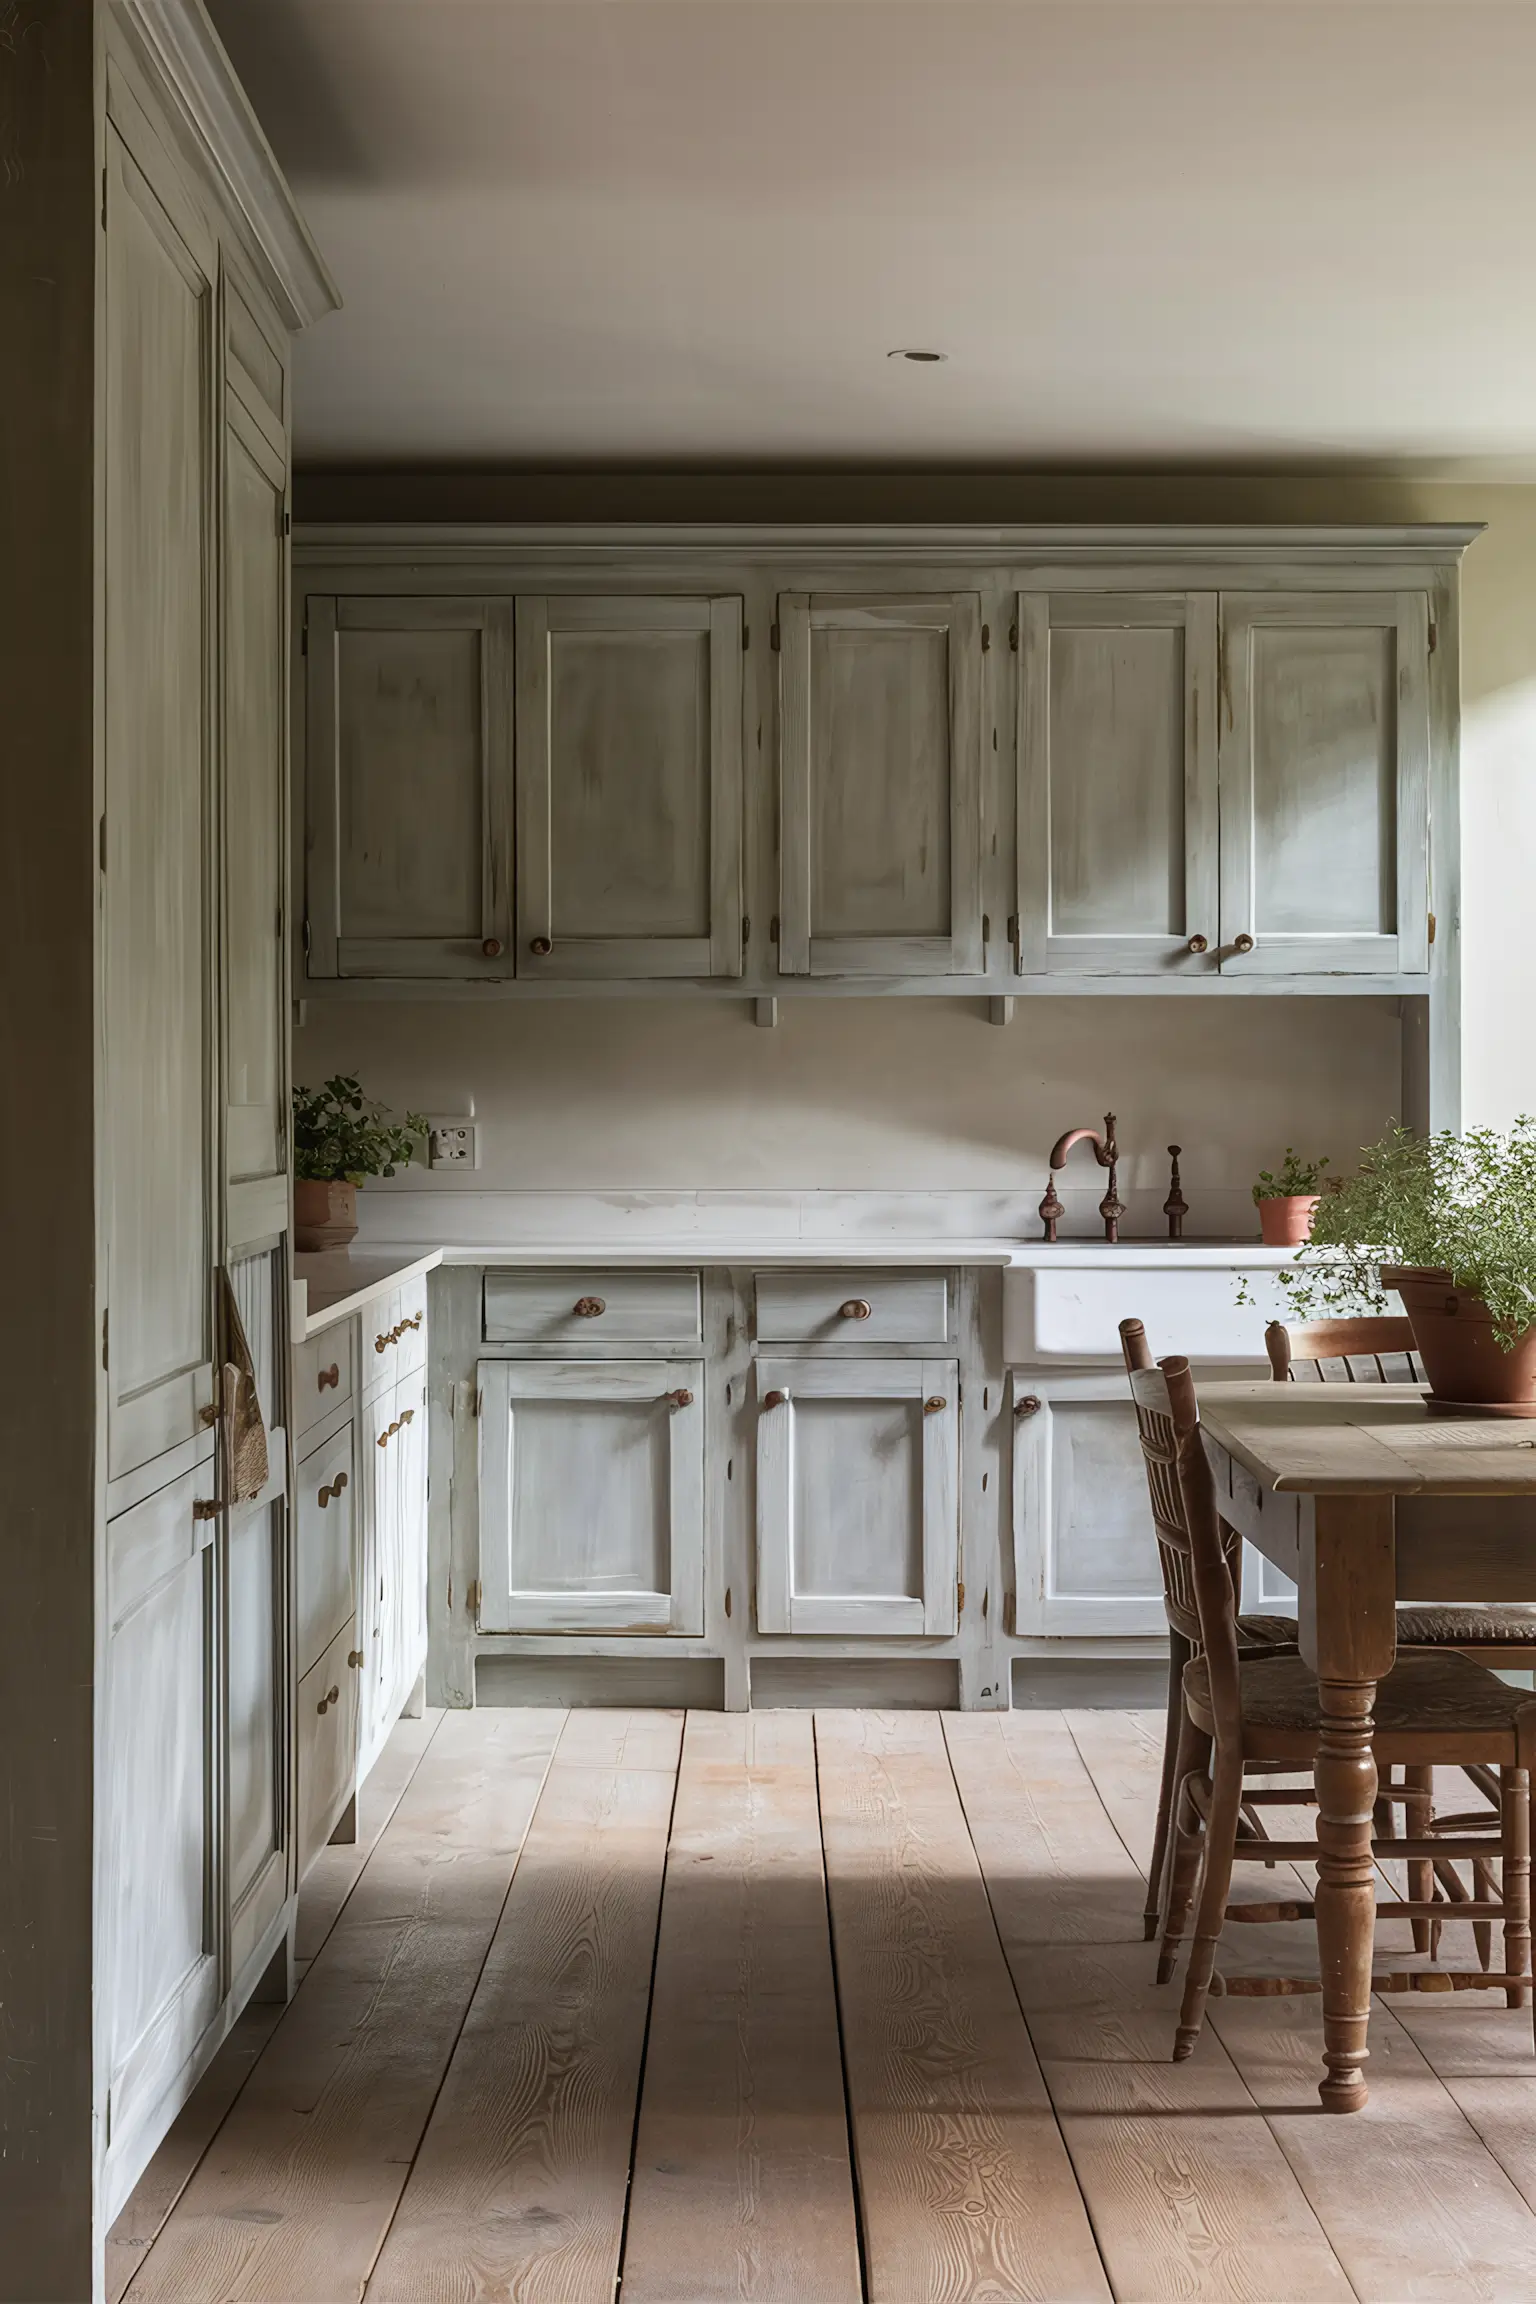 Minimalistic farmhouse kitchen with distressed paint cabinets and rustic handles.